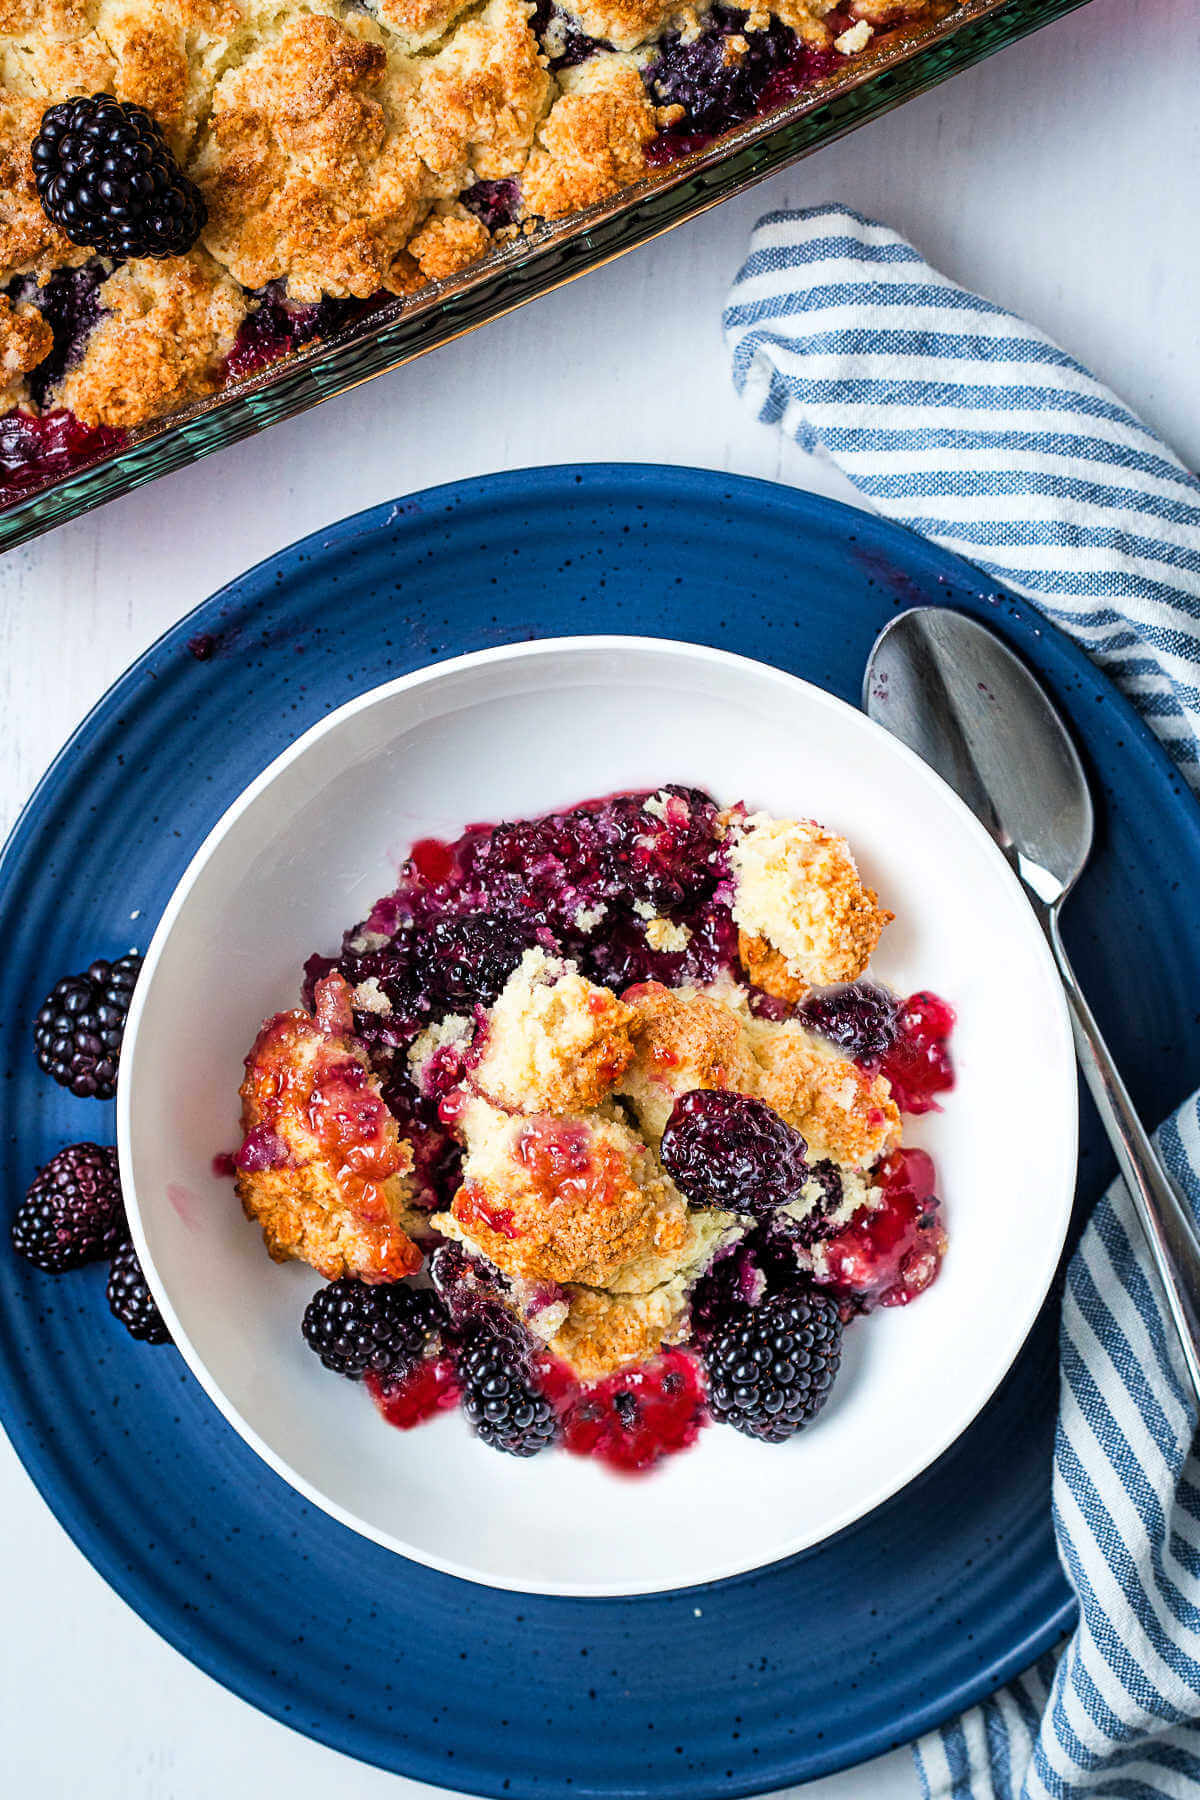 A serving of blackberry cobbler in a bowl on a table with a baking dish of cobbler in the background.